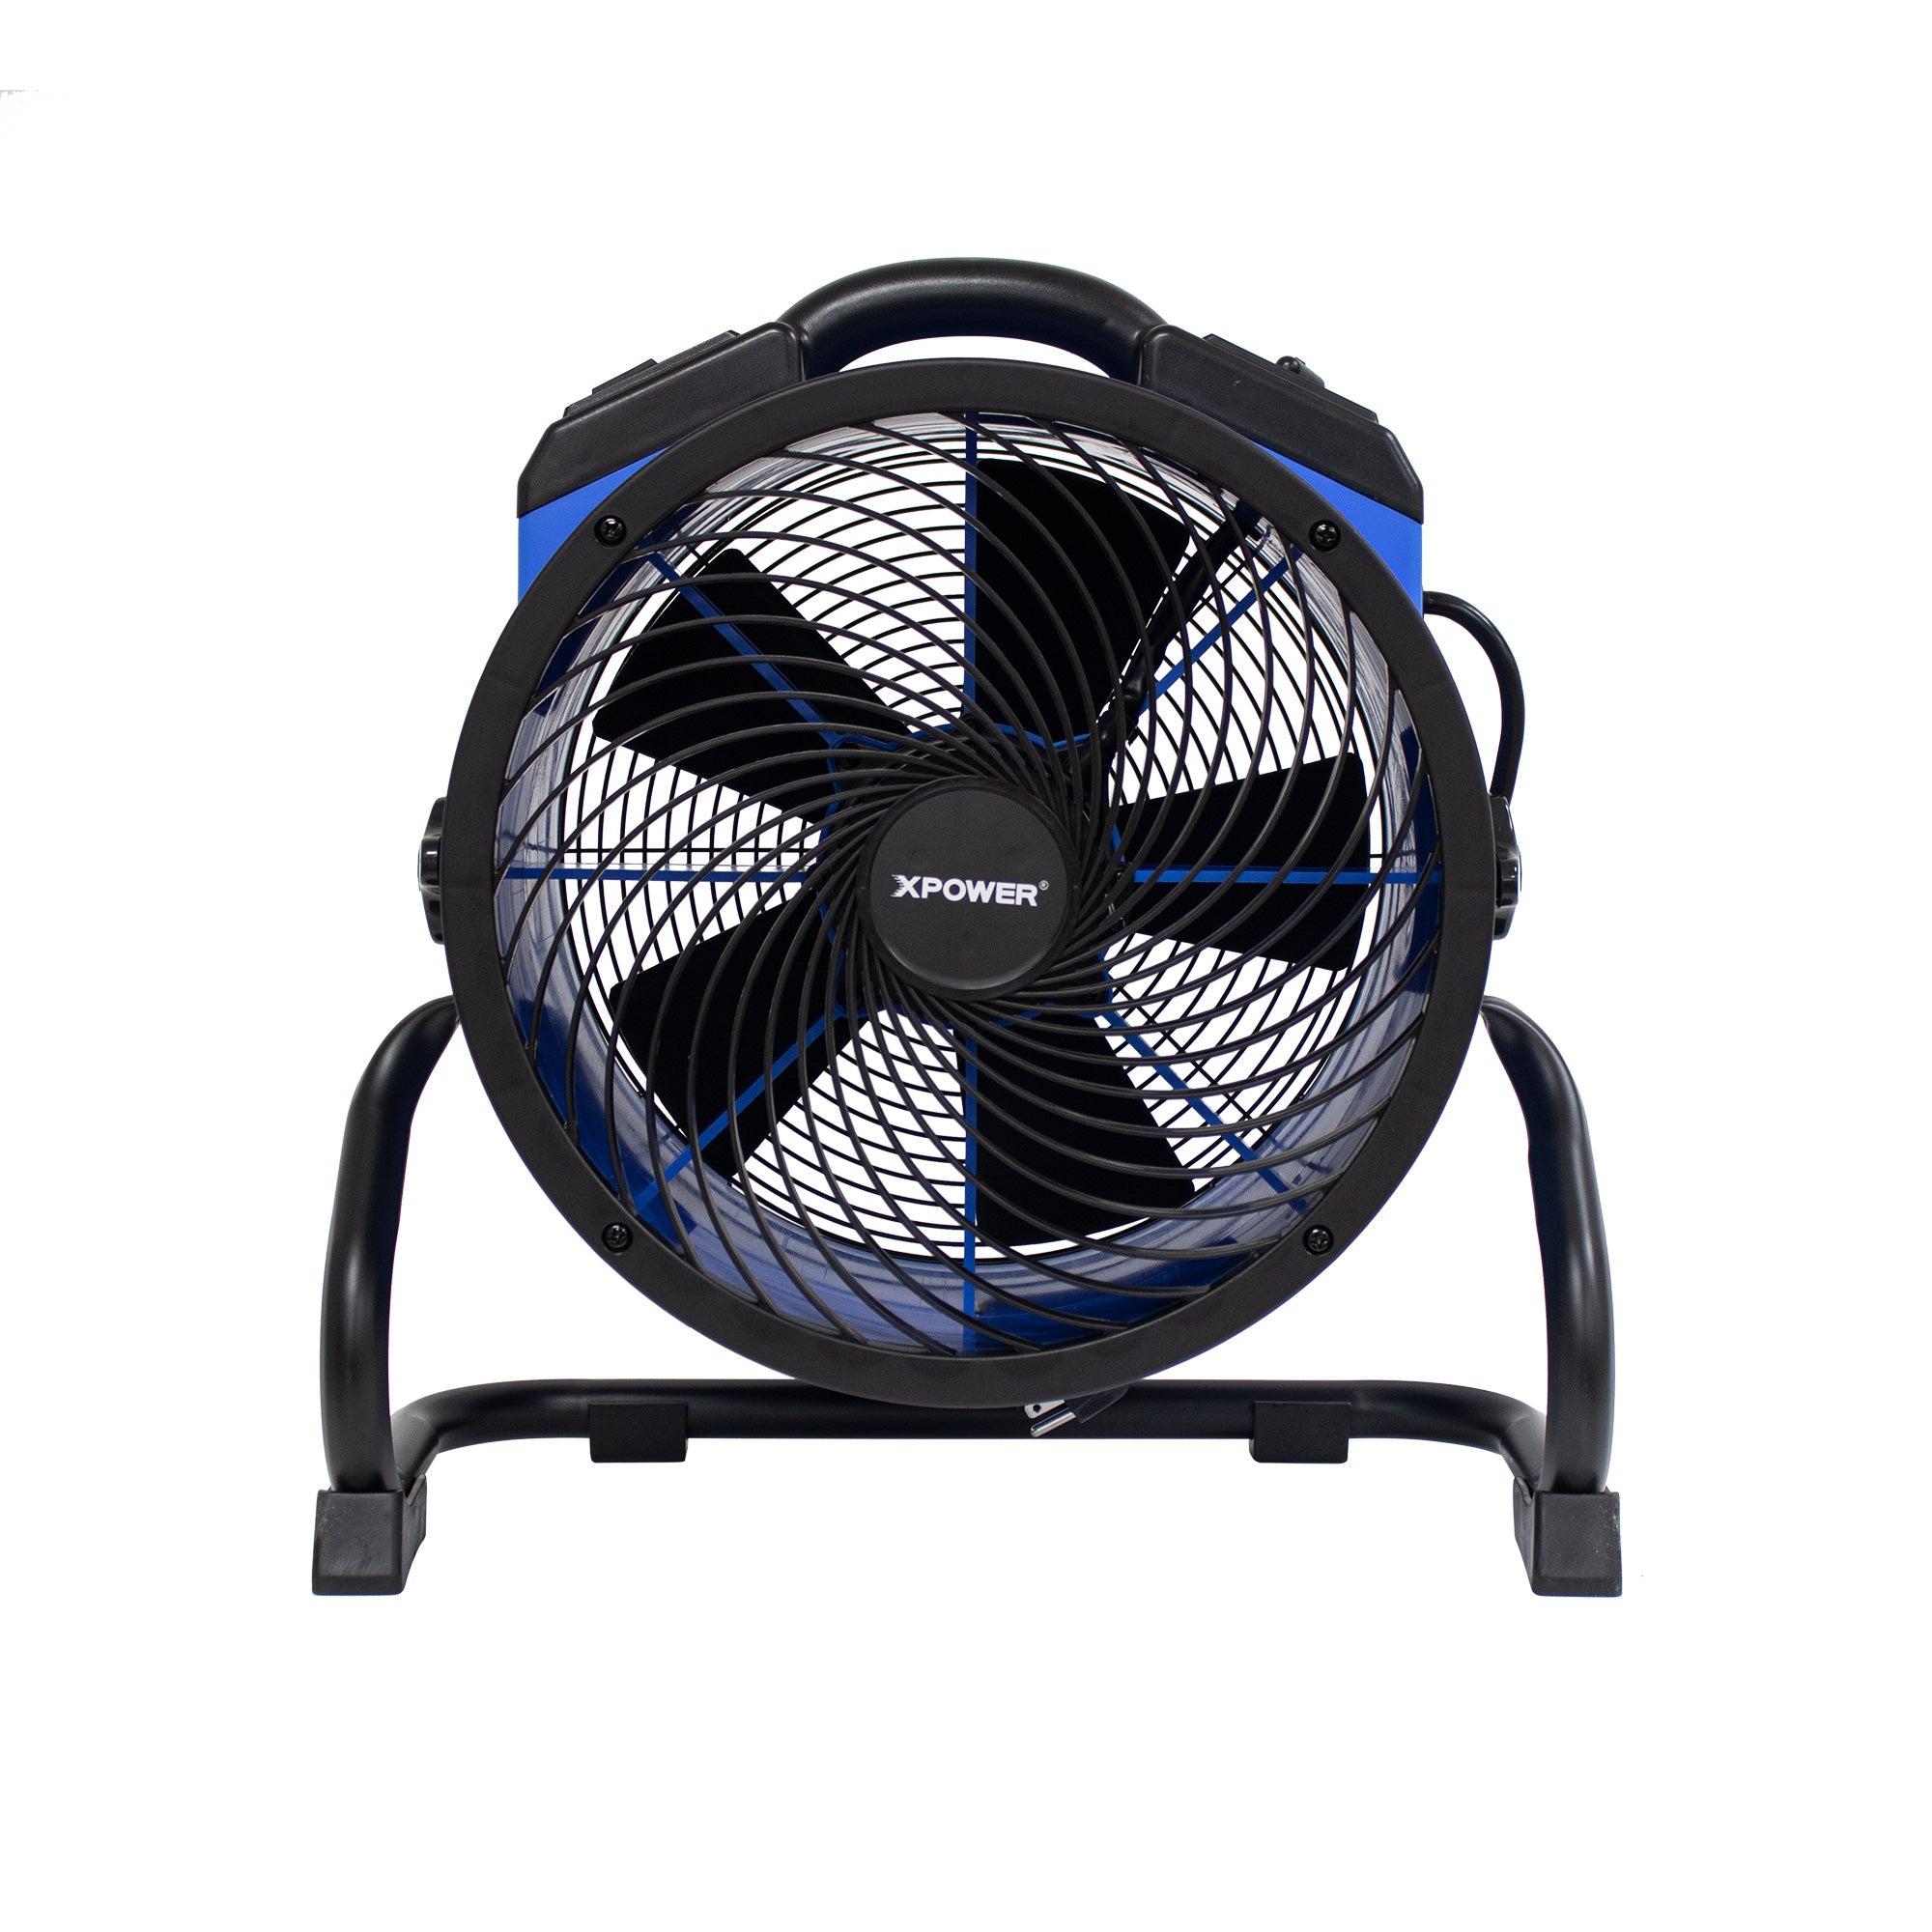 XPOWER P-39AR 1/4 HP 2100 CFM 4 Speed Industrial Axial Air Mover, Blower, Fan with Built-in Power Outlets - Blue